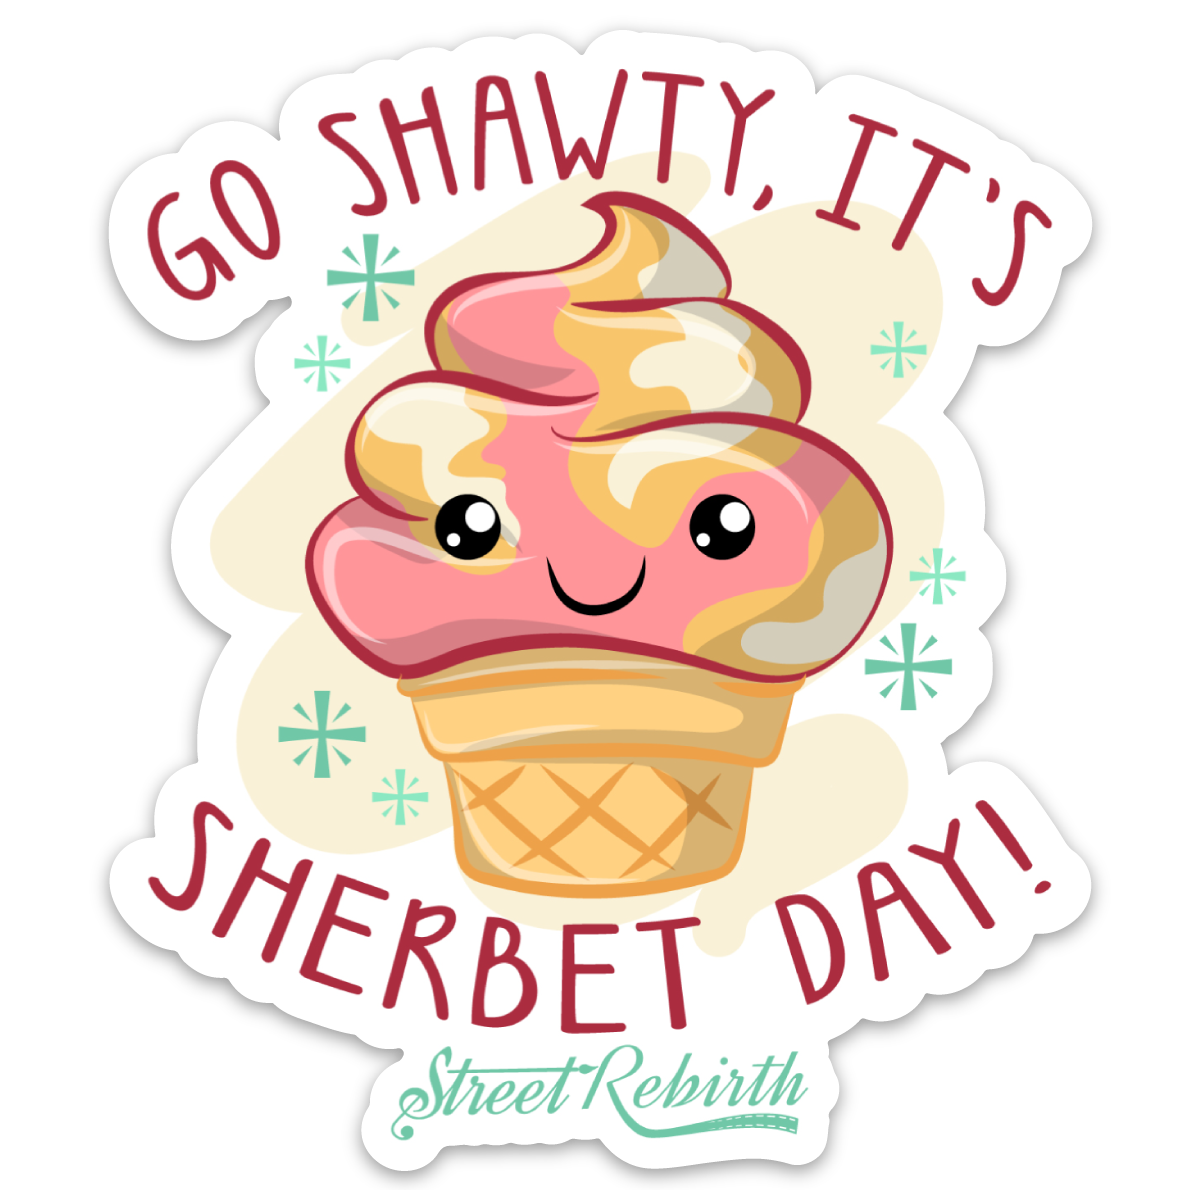 GO SHAWTY, IT'S SHERBET DAY! STICKER – ONE 4 INCH WATER PROOF VINYL STICKER – FOR HYDRO FLASK, SKATEBOARD, LAPTOP, PLANNER, CAR, COLLECTING, GIFTING